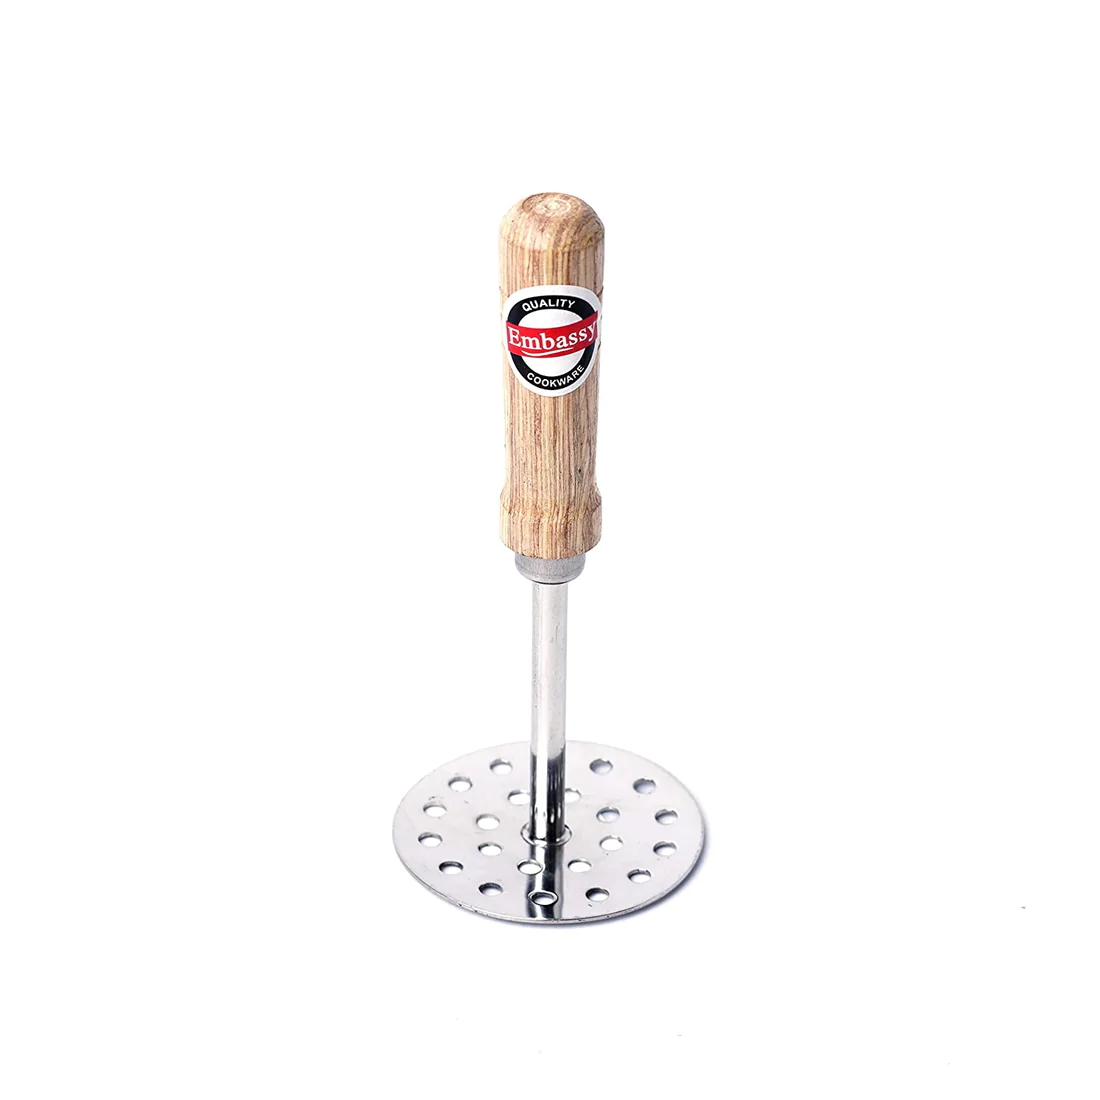 Embassy Stainless Steel Potato Masher with Wooden Handle Size 3 - 8.5 cms